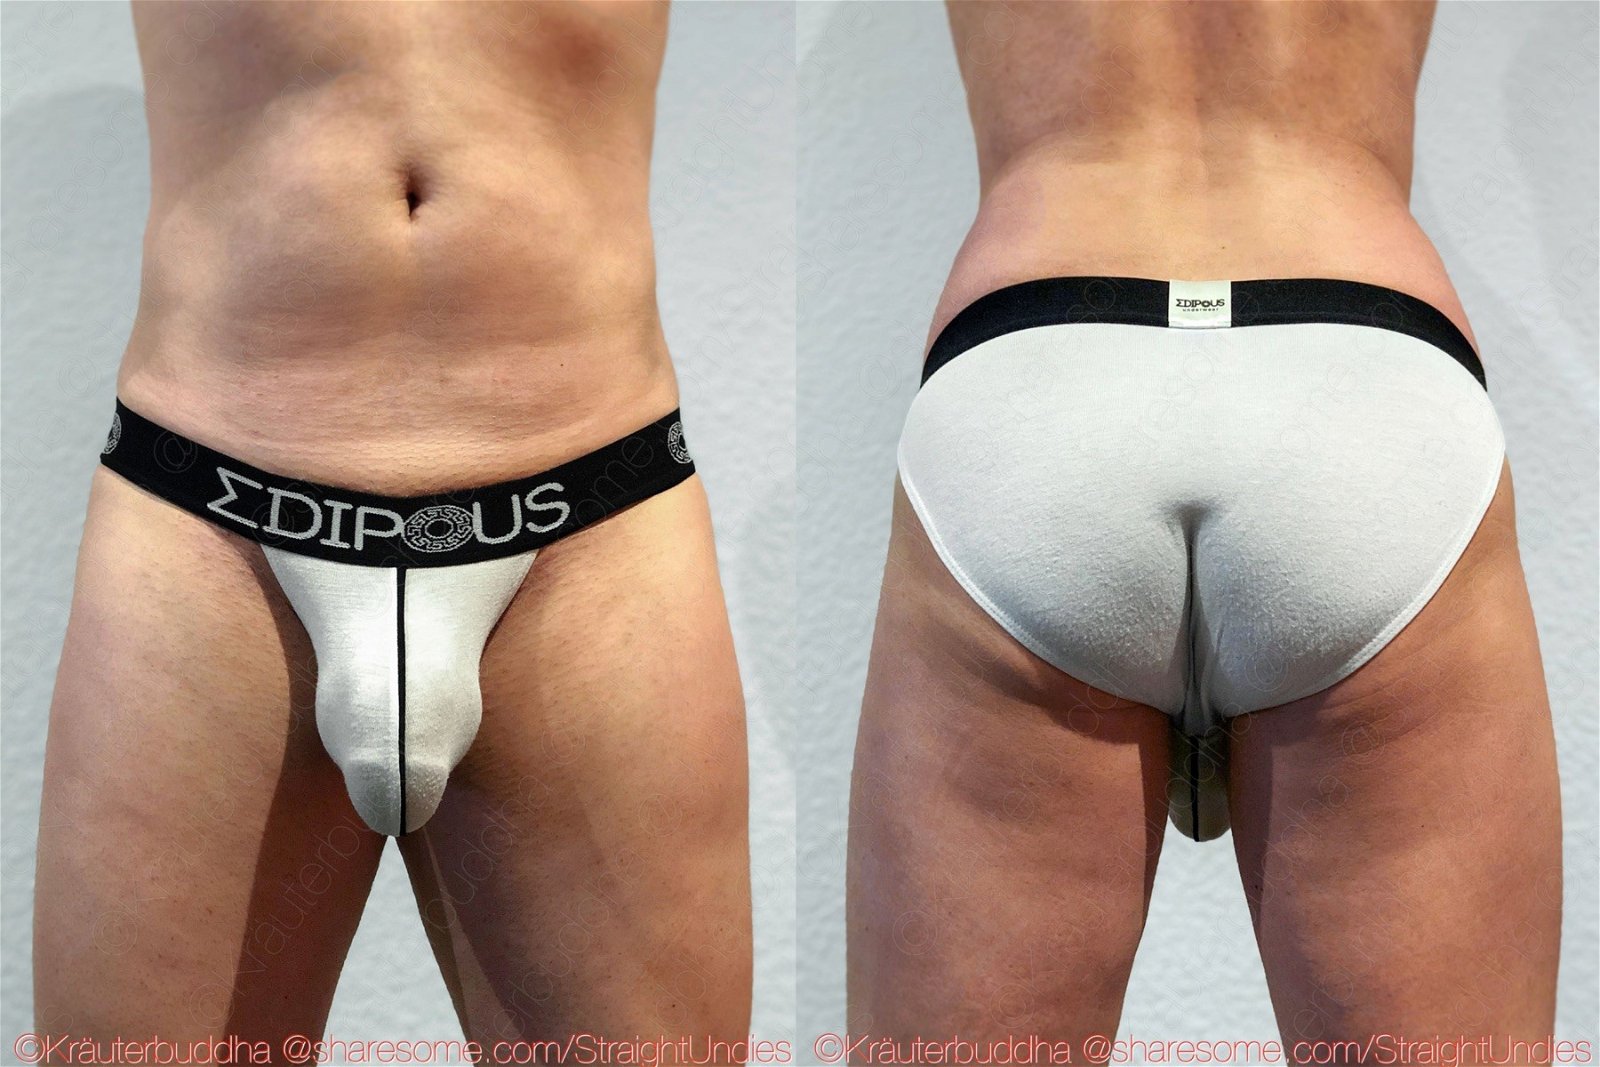 Photo by Kräuterbuddha with the username @StraightUndies, who is a verified user,  January 12, 2019 at 4:51 PM. The post is about the topic Straight Underwear and the text says 'Edipous
#underwear #mensunderwear #briefs #edipous'